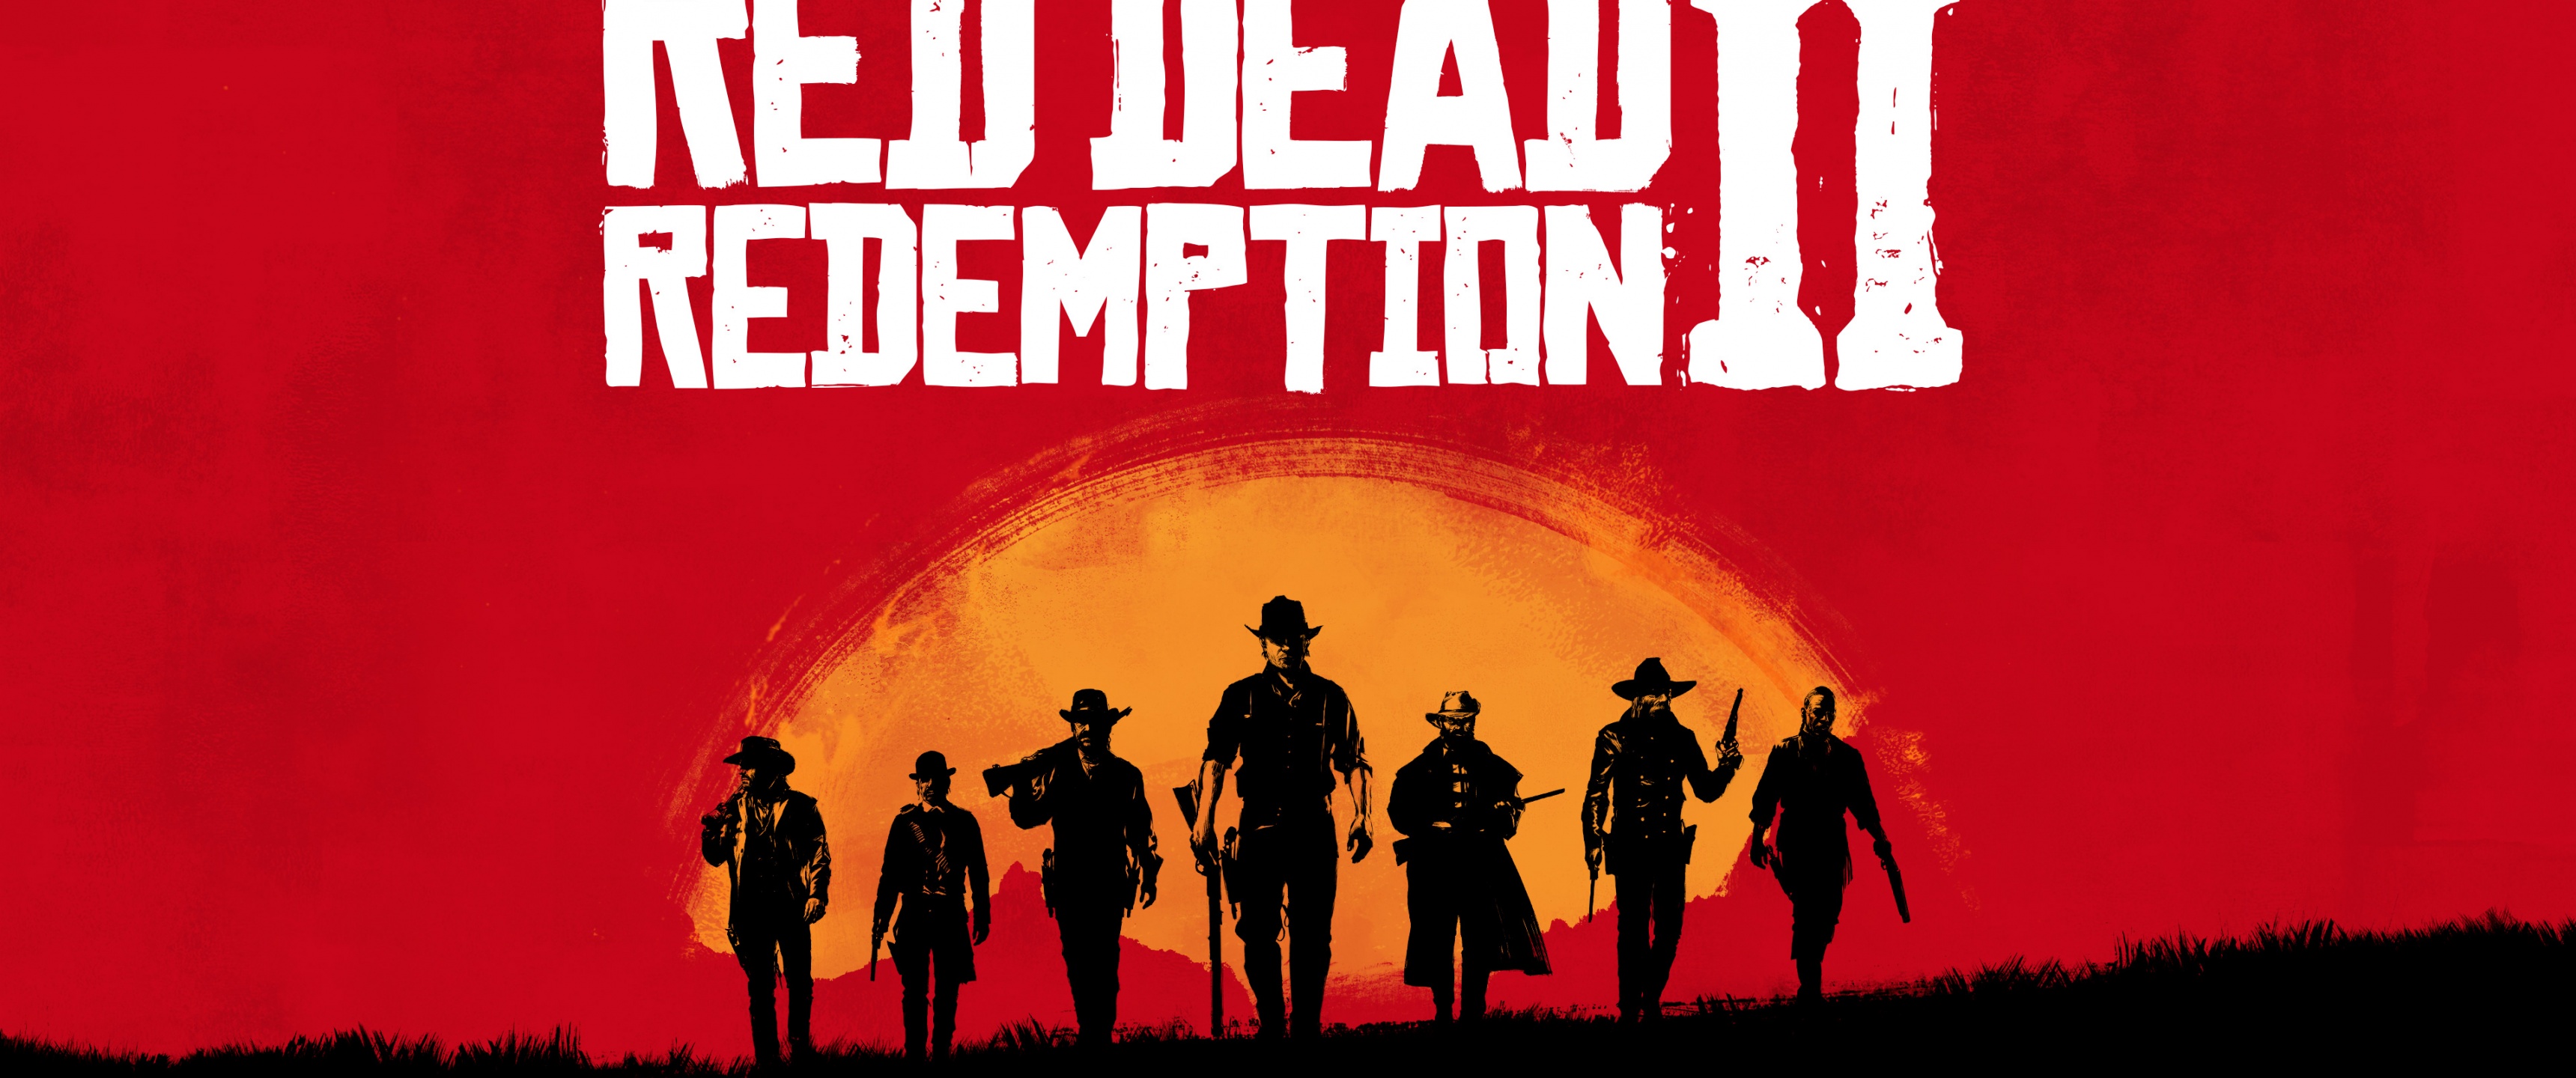 Red Dead Redemption 2 Wallpapers - PlayStation Universe